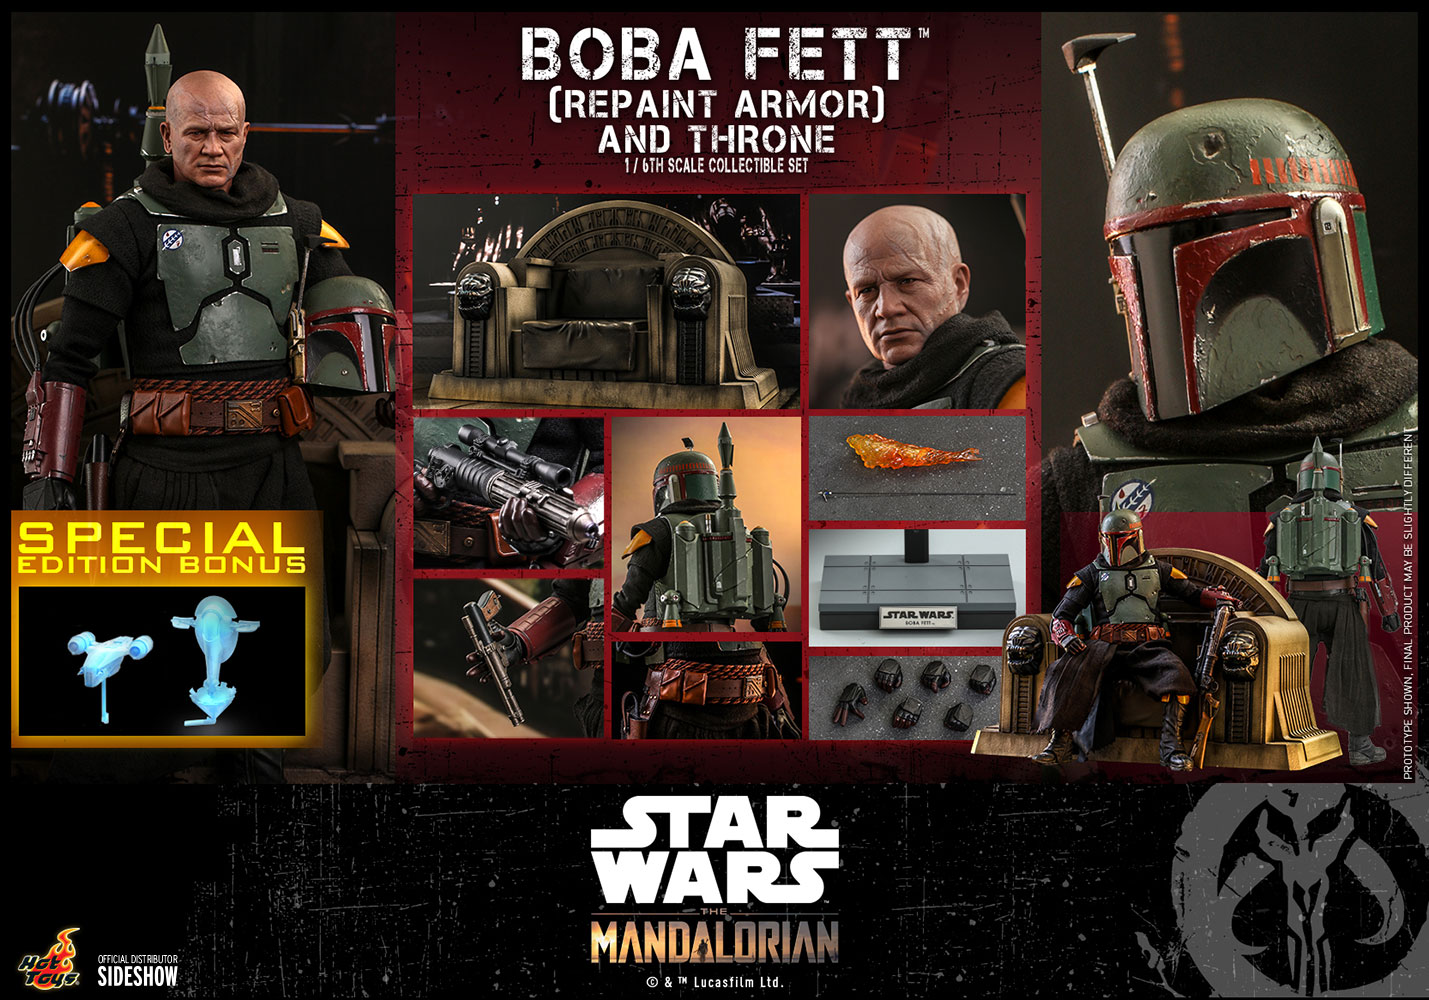 boba-fett-repaint-armor-special-edition-and-throne_star-wars_gallery_60ee52ccc64fe.jpg